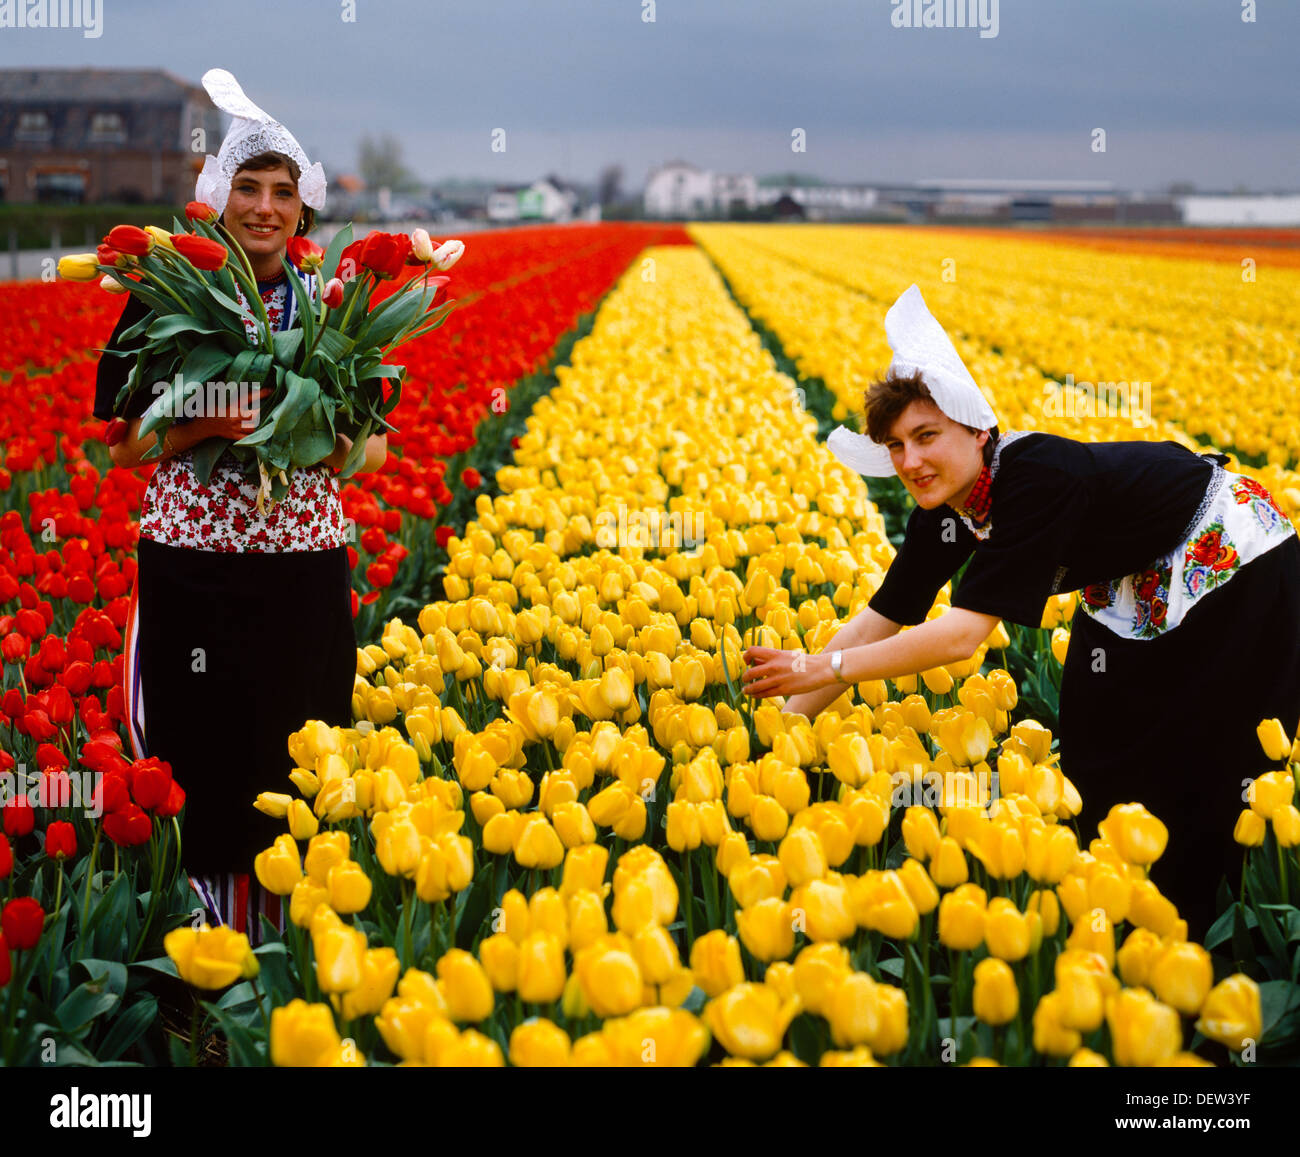 Lisse Holland Bulb Fields - Tulips Girls In National Costume Stock Photo